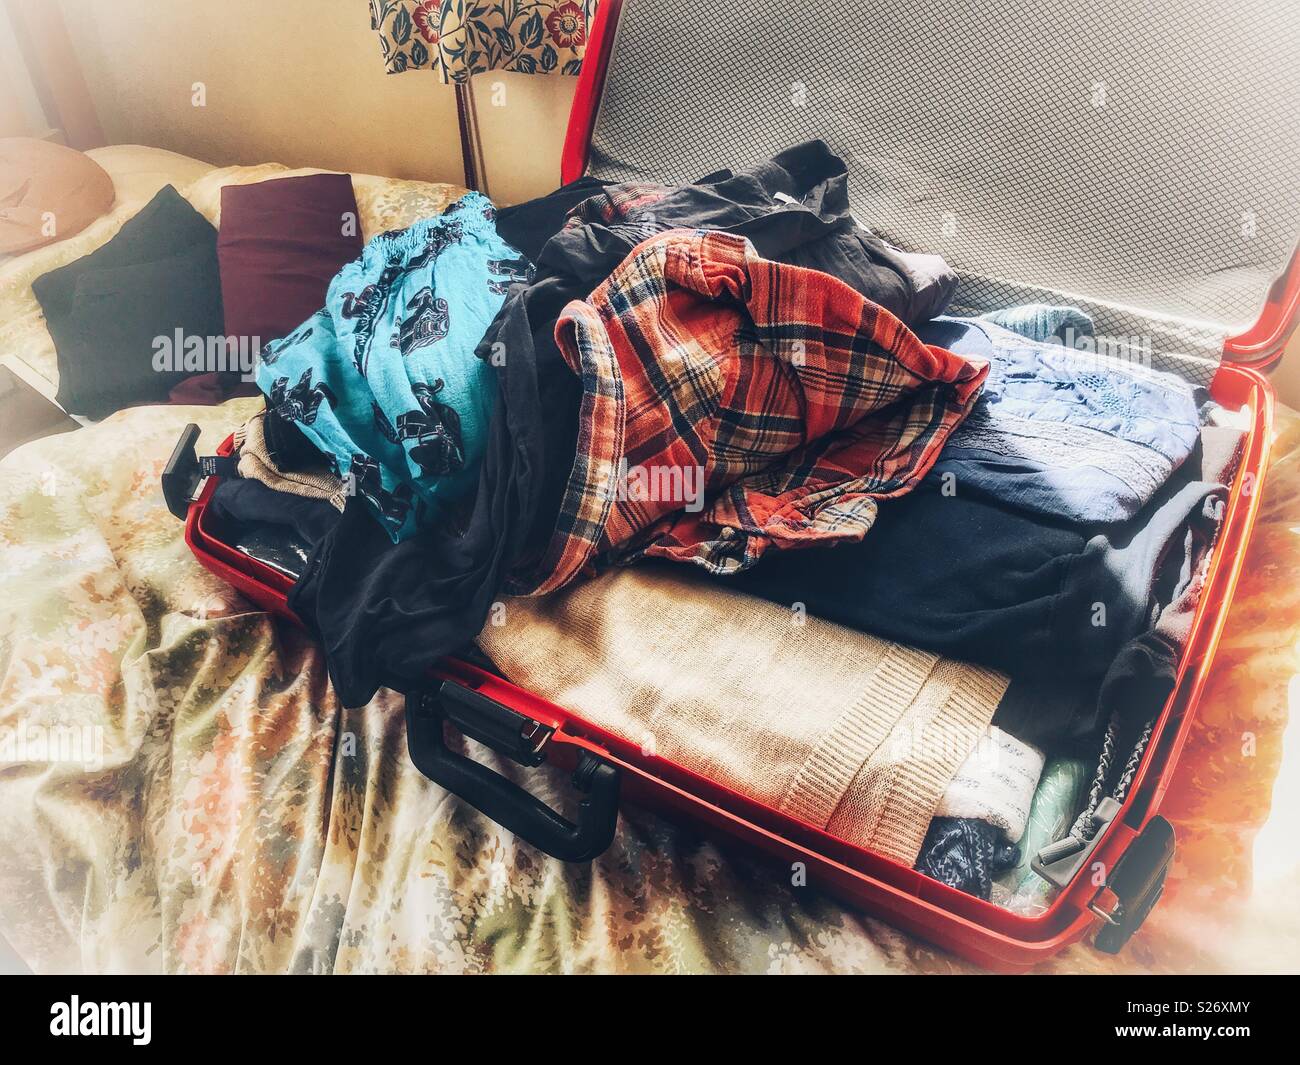 Open suitcase, full of clothes, on a bed Stock Photo